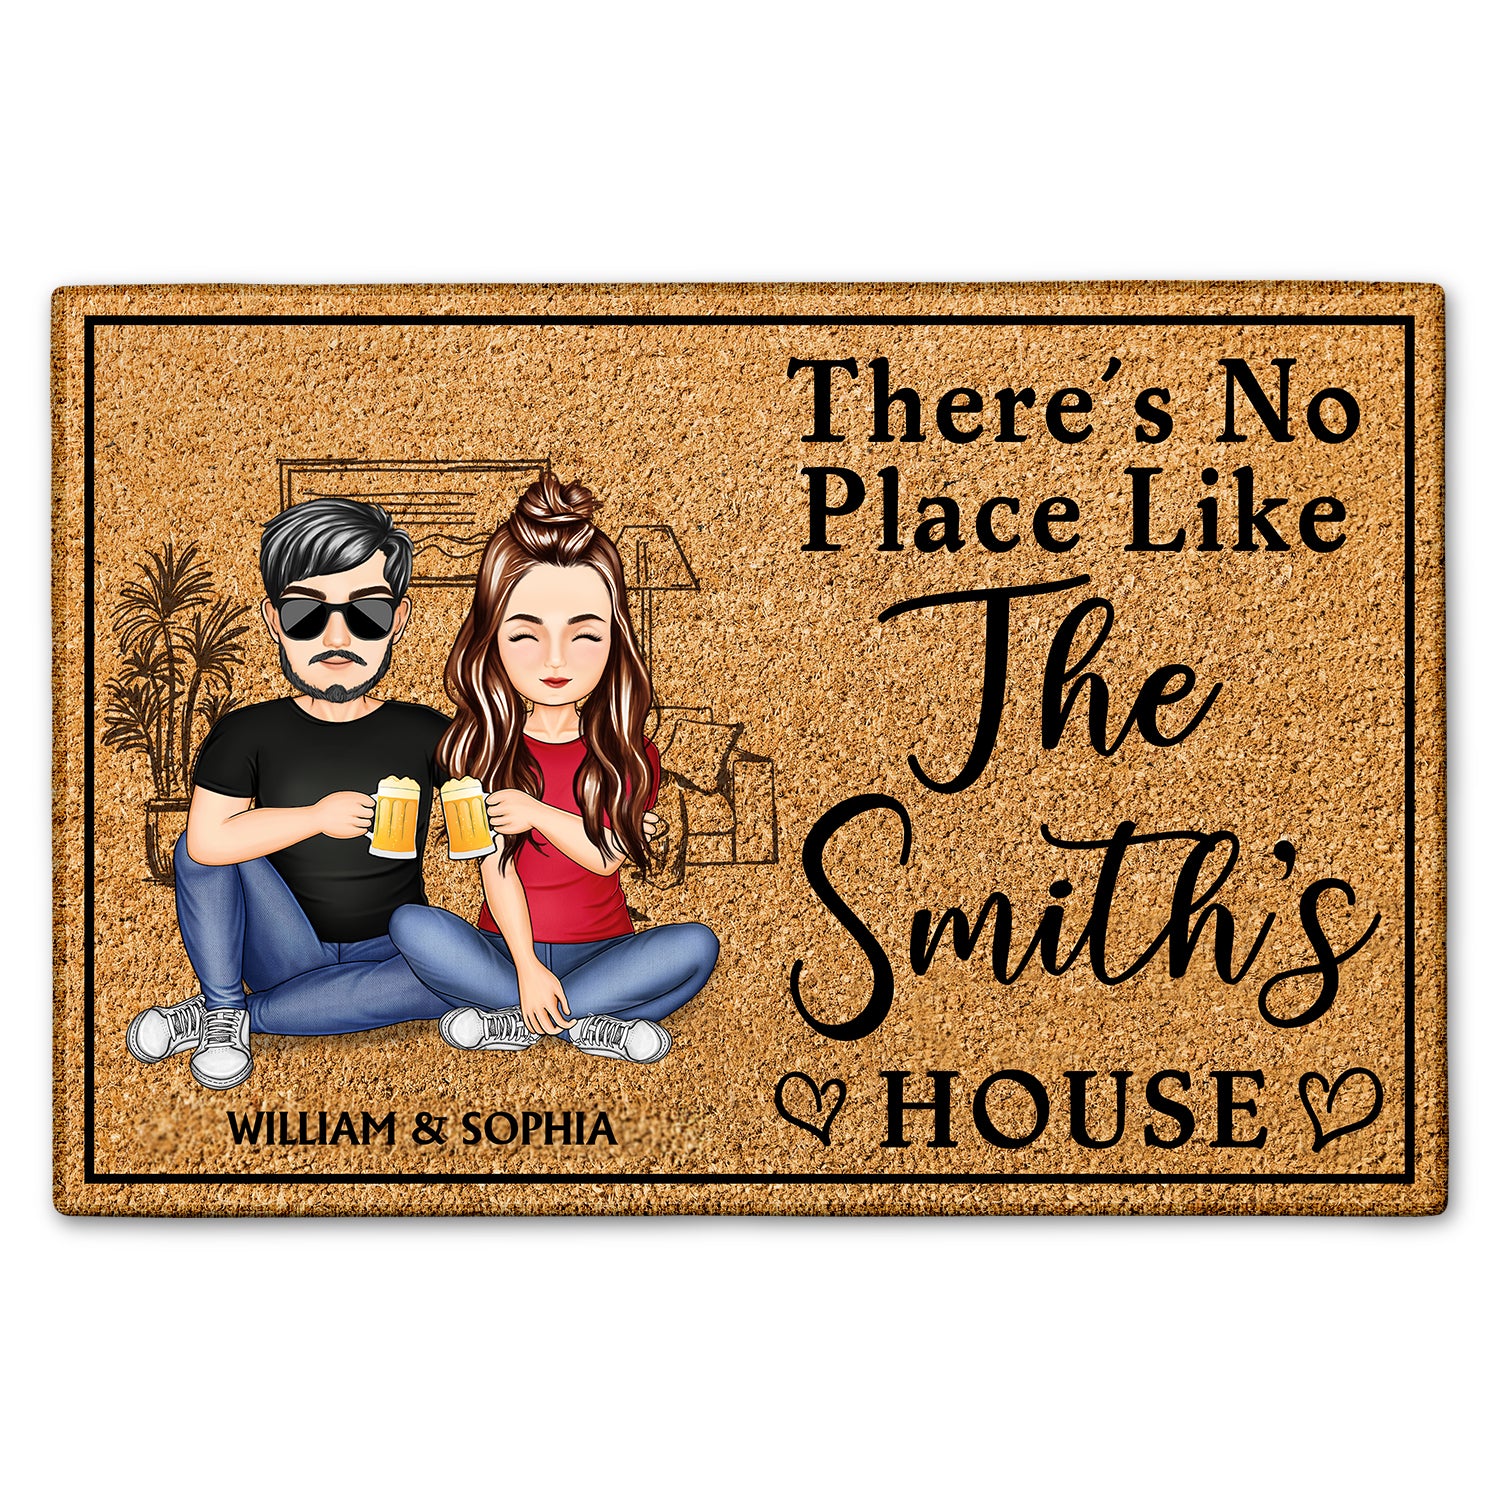 There's No Place Like Family House - Anniversary, Birthday, Home Decor Gift For Spouse, Lover, Husband, Wife, Boyfriend, Girlfriend, Couple - Personalized Custom Doormat